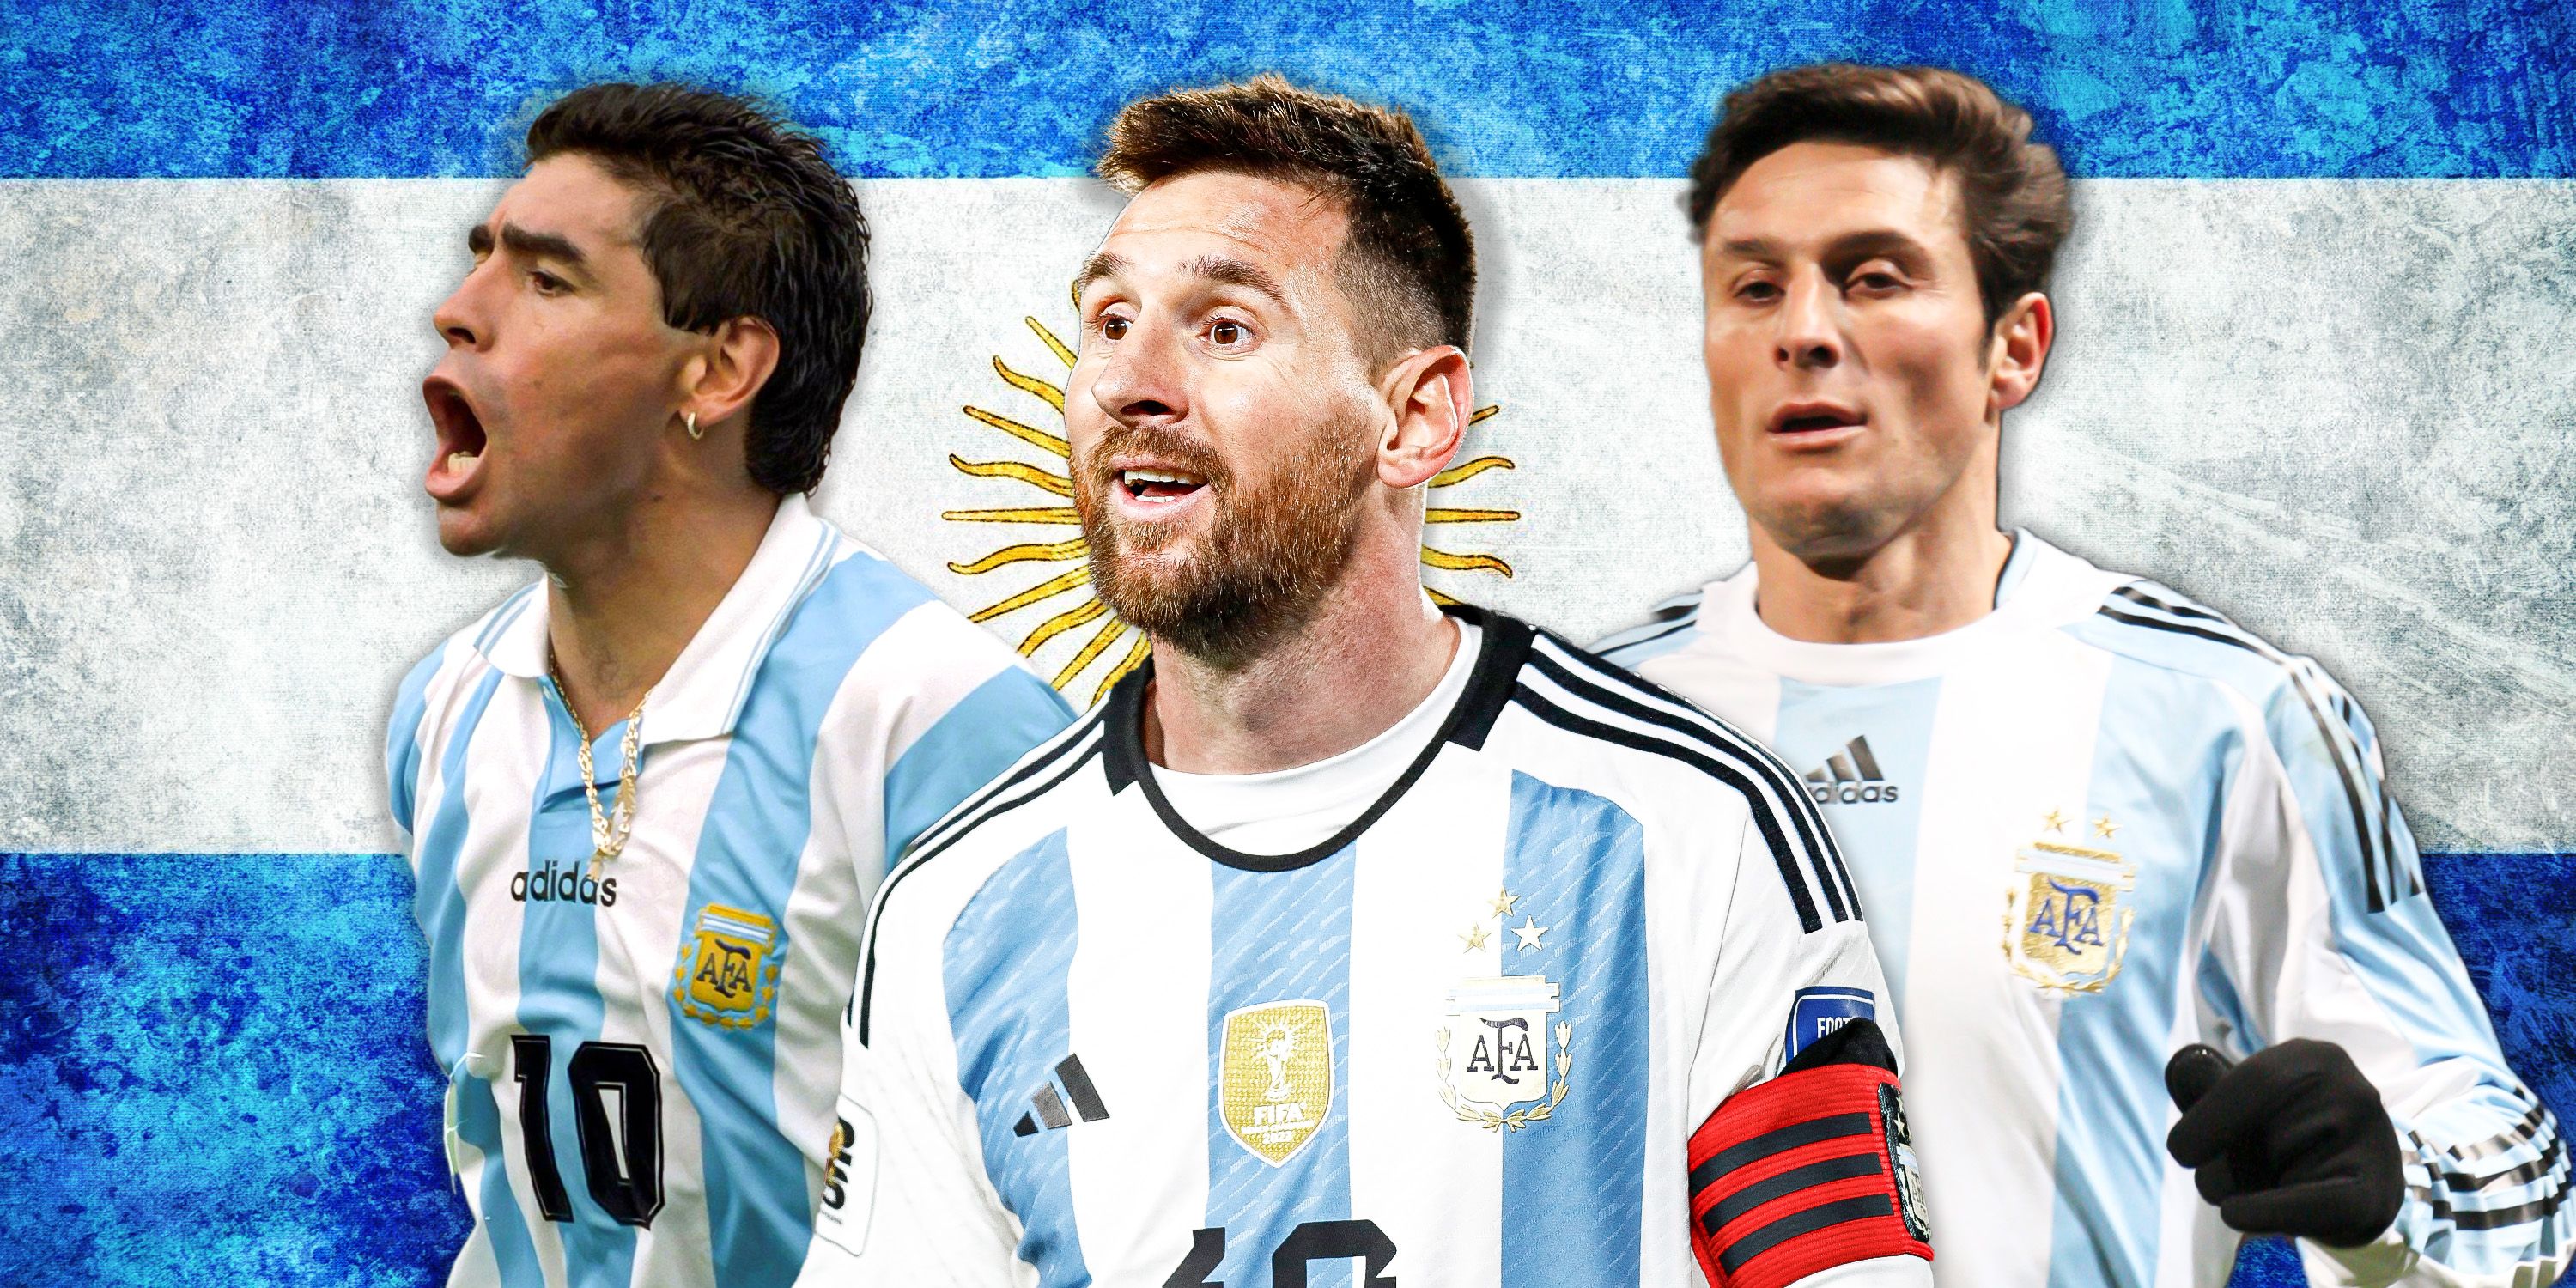 Lionel Messi on either side Diego Maradona and Javier Zanetti all in Argentina kit